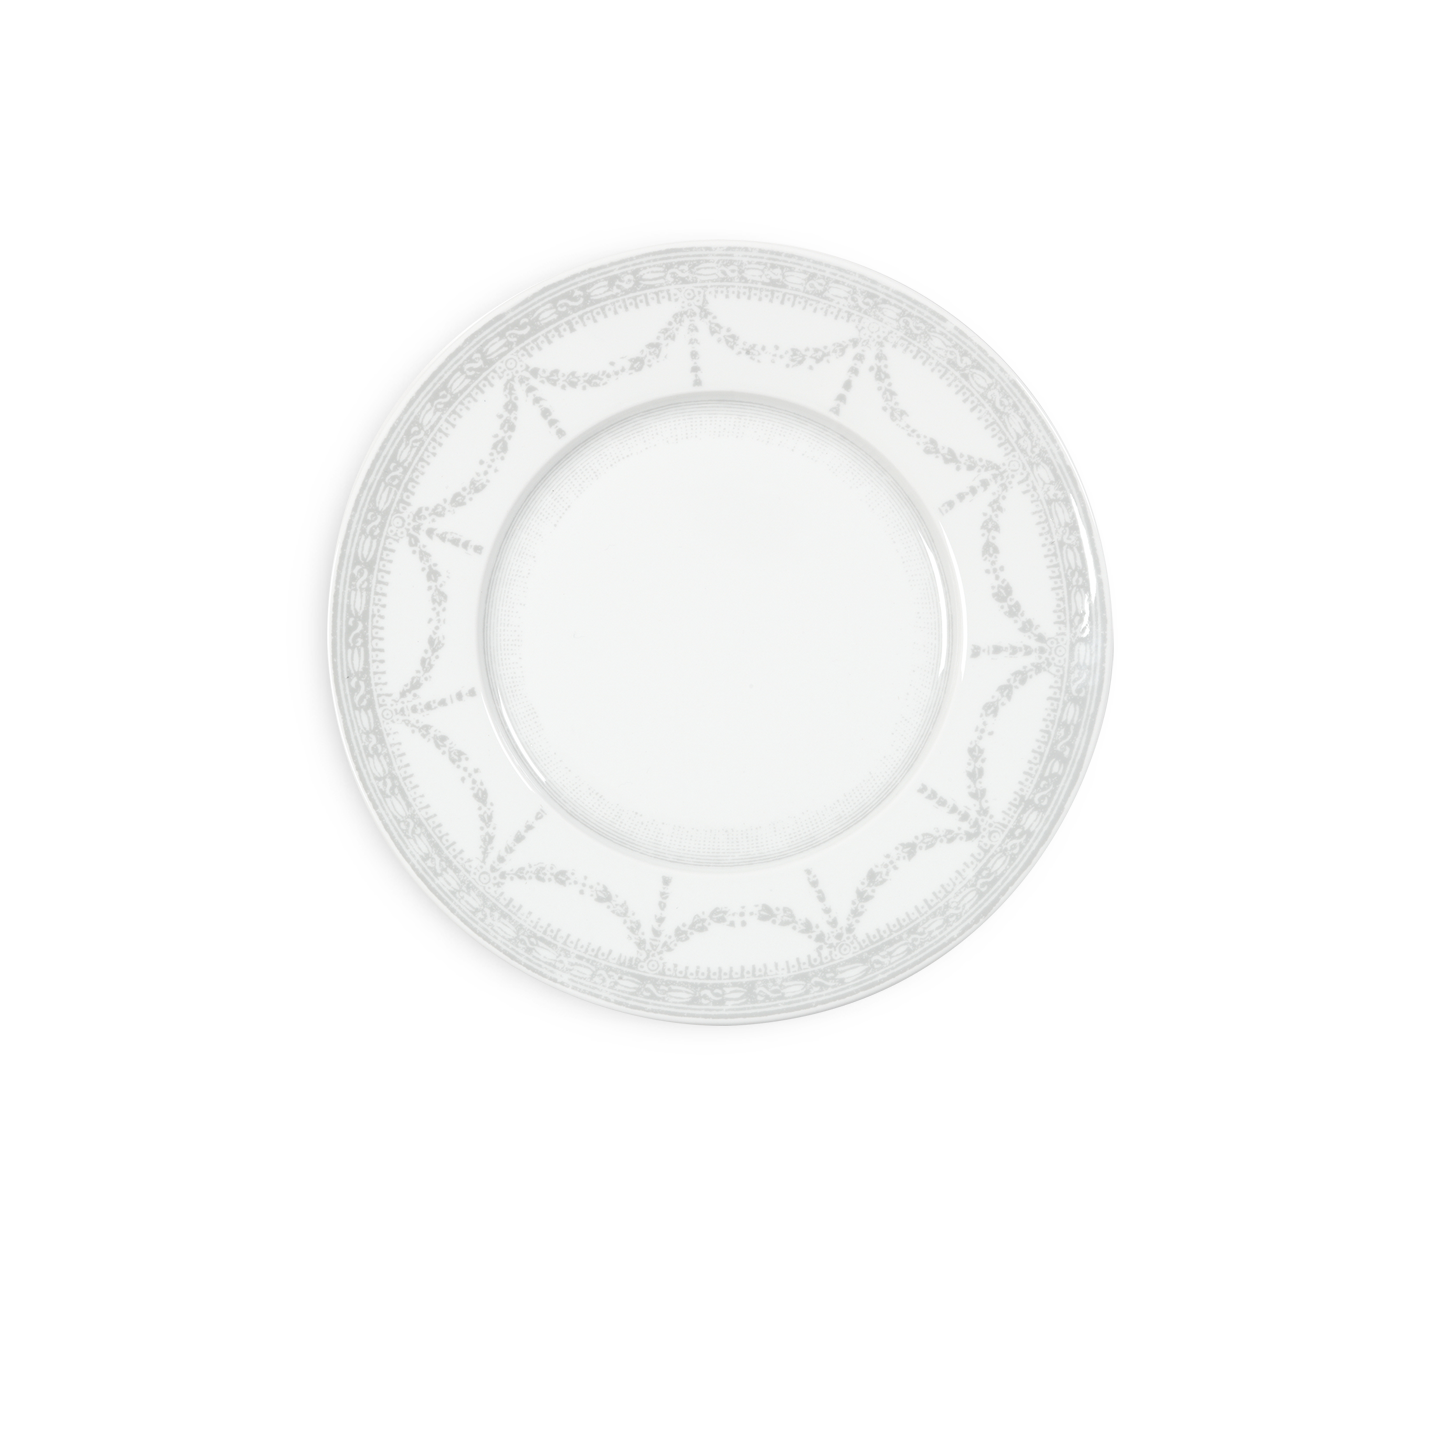 Grand Siecle 11.75" Plate, Set of 4